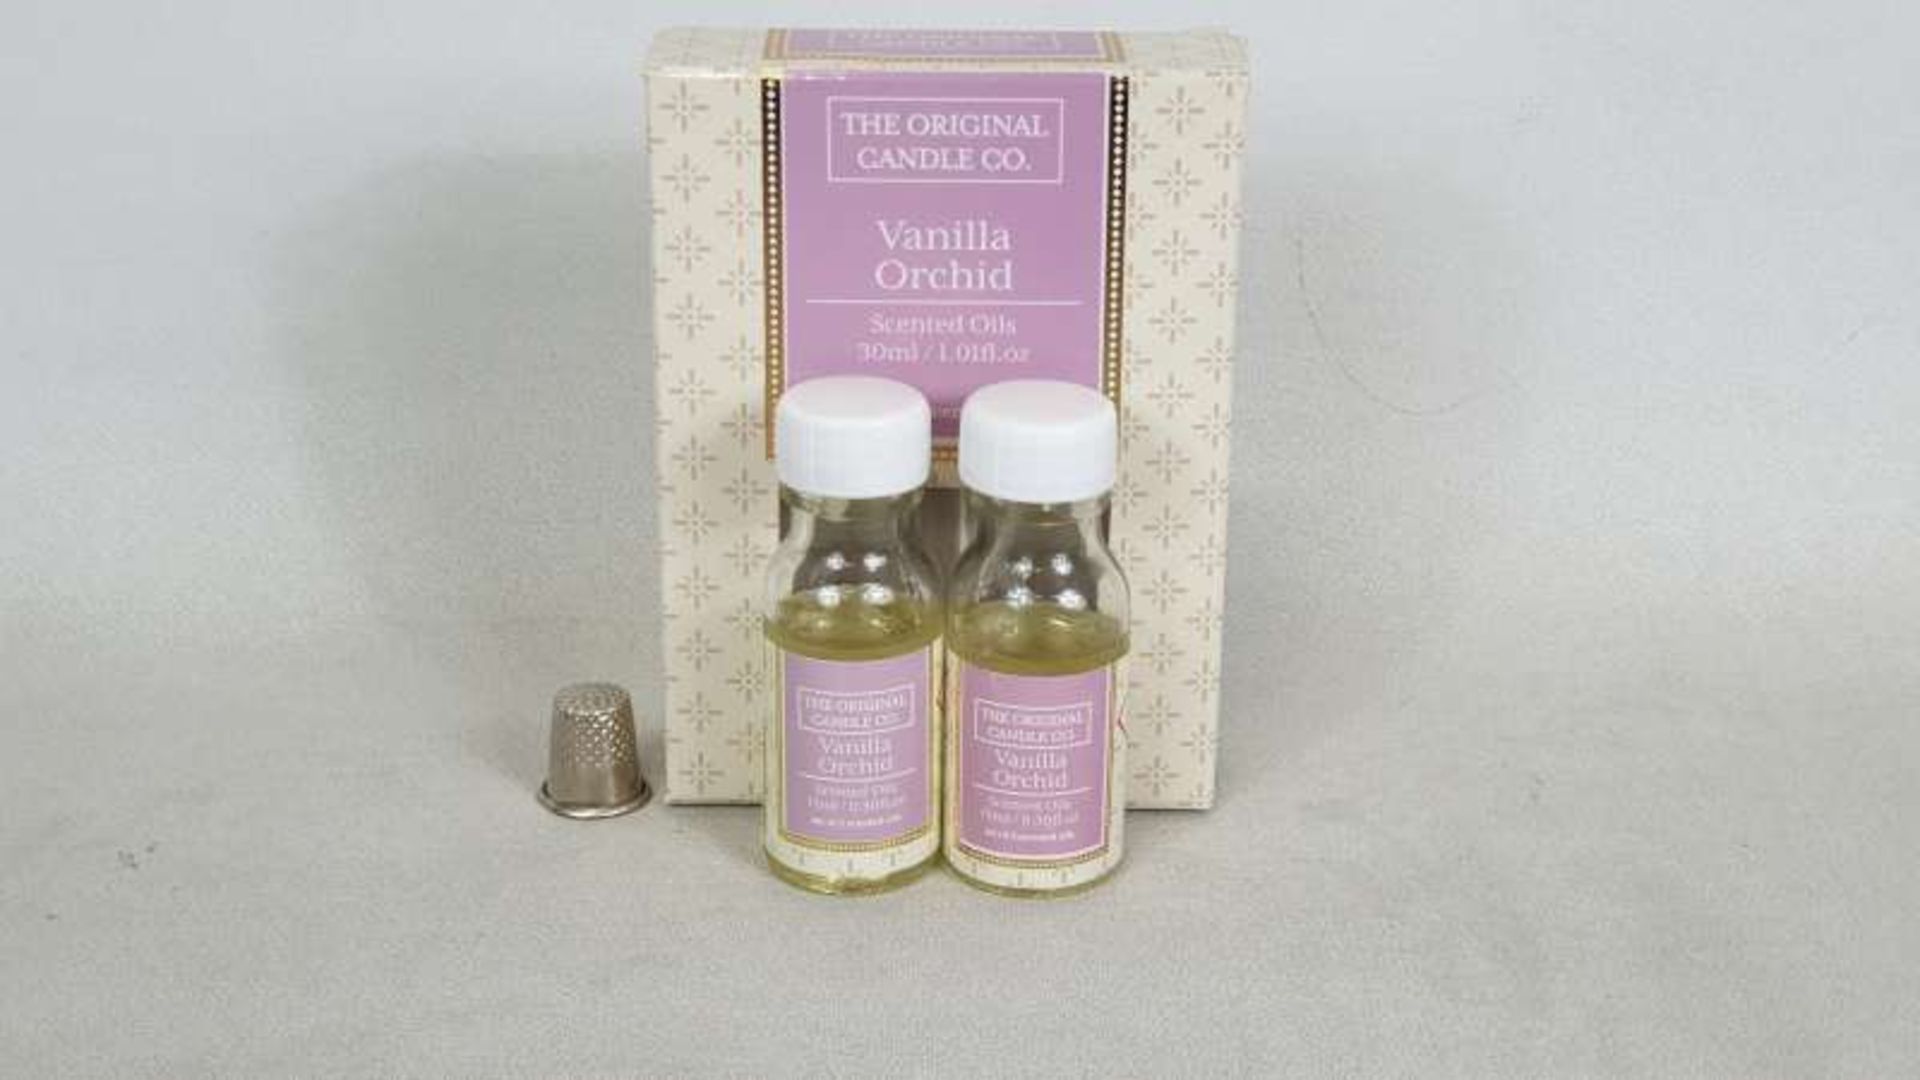 240 X SETS OF 2 VANILLA ORCHID 30ML SCENTED OILS IN 10 BOXES